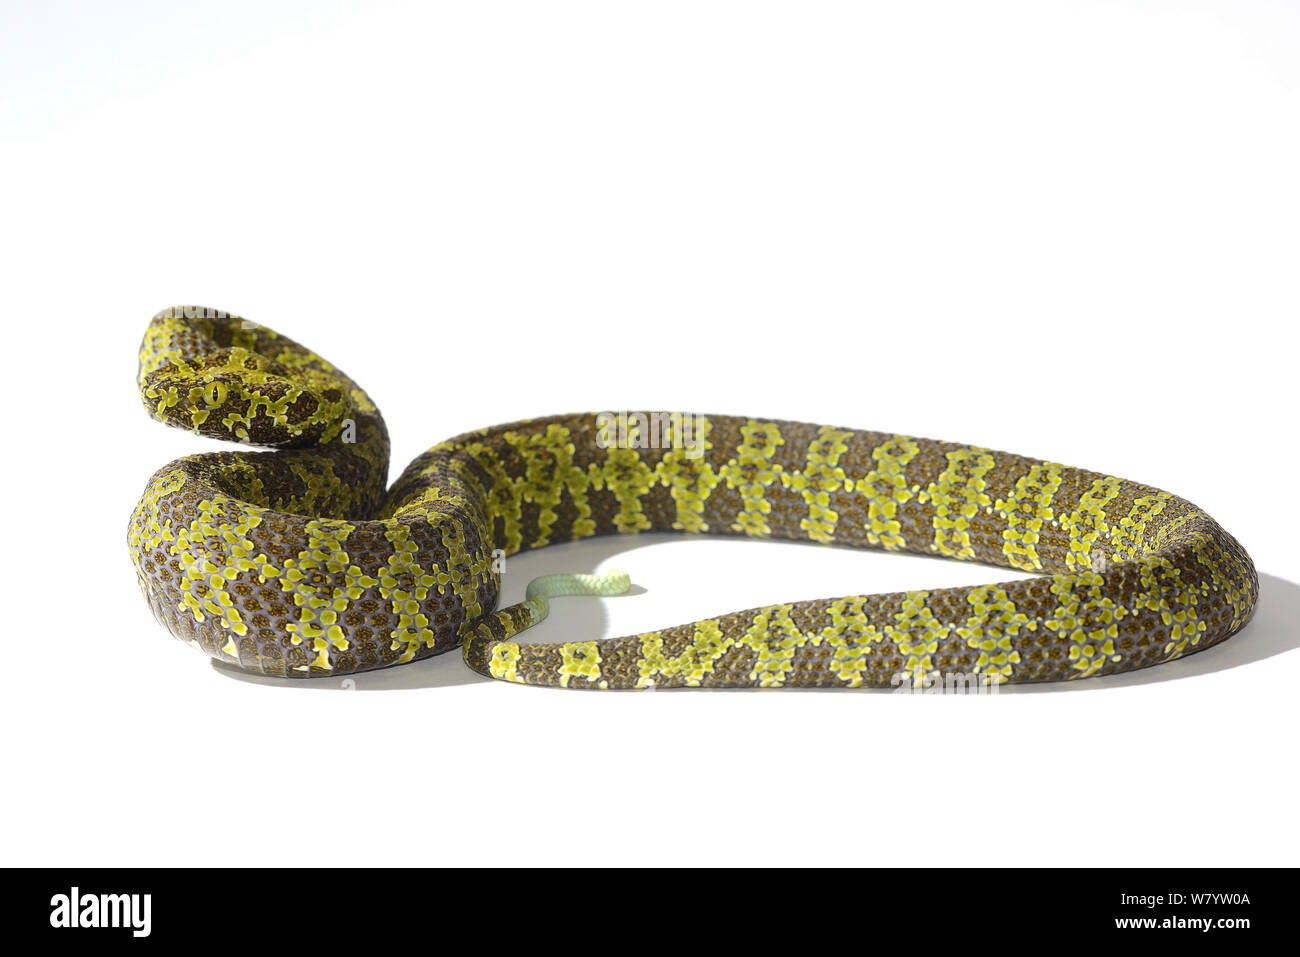 Mangshan pitviper (Trimeresurus mangshanensis) on white background. Captive, occurs in Hunan and Guandong Provinces, China. Endangered species. Stock Photo